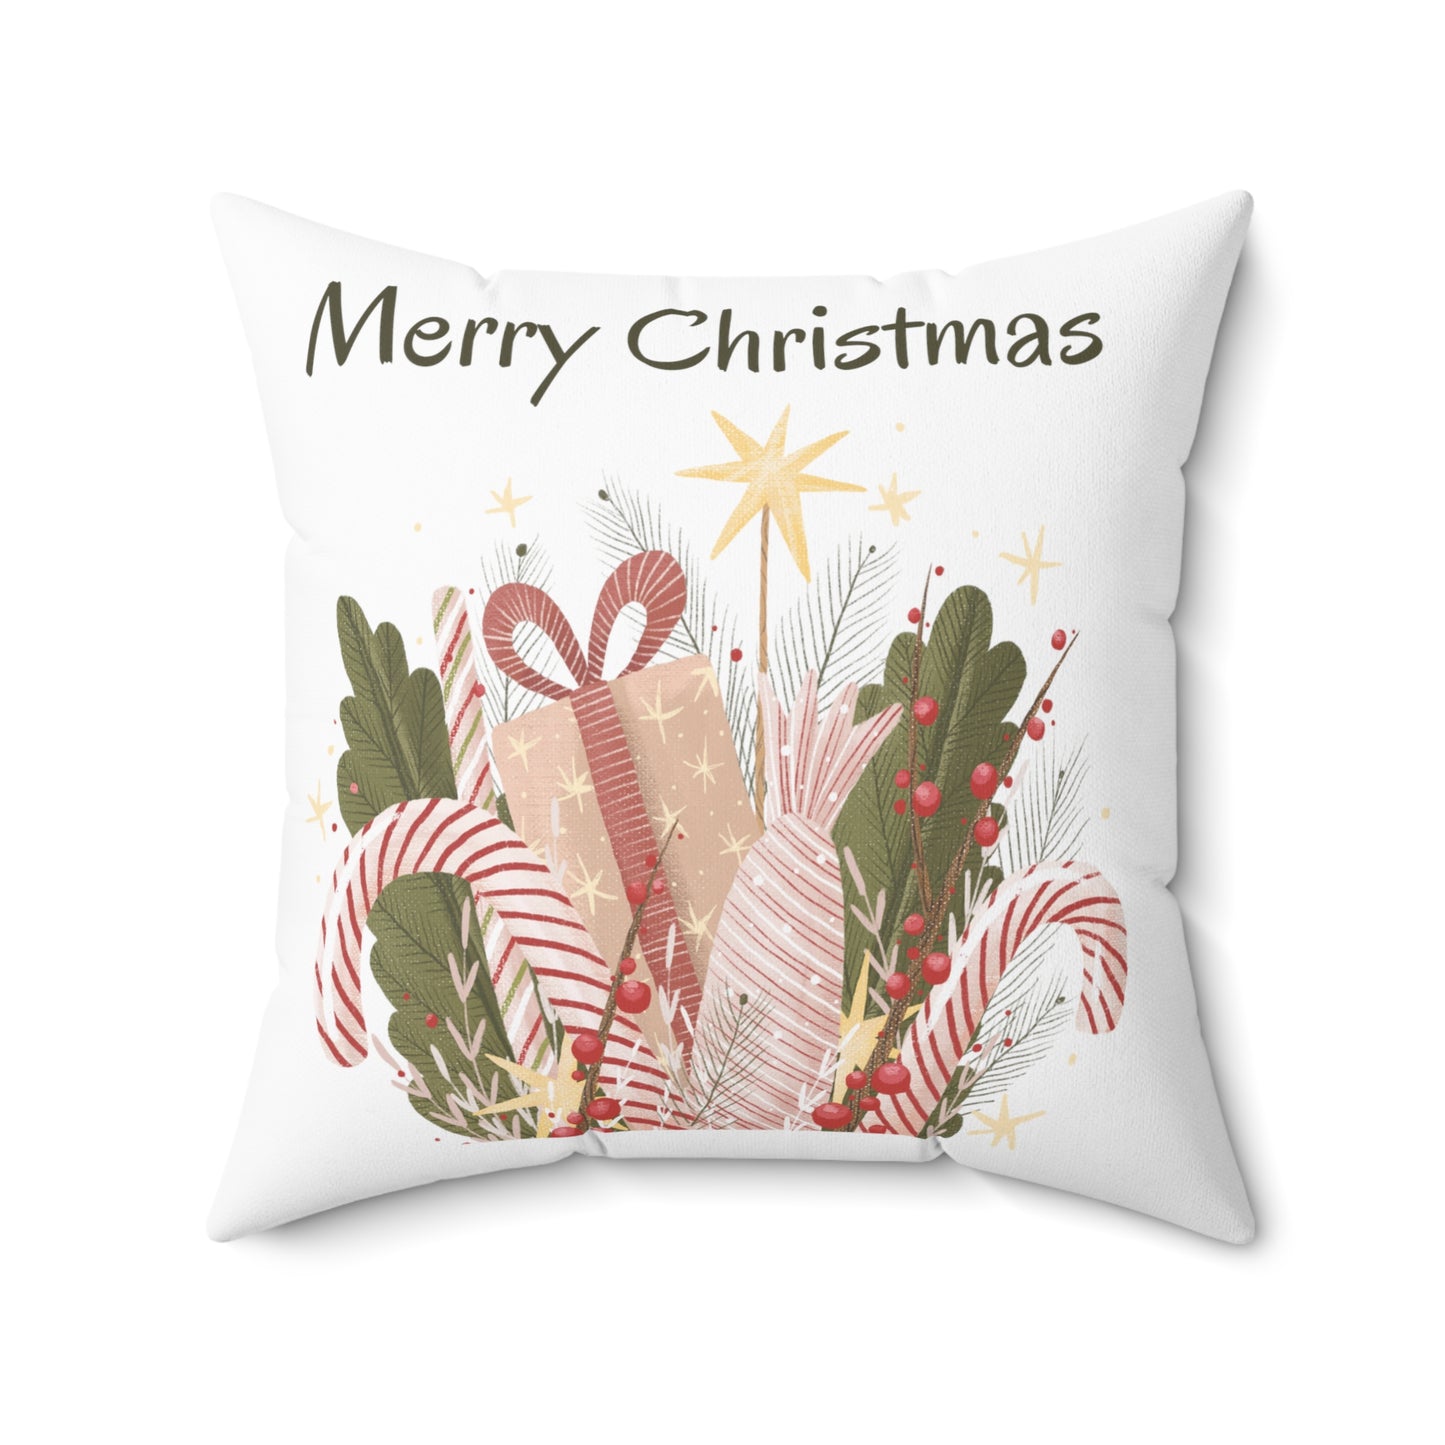 Merry Christma Celebration Printed Polyester Square Pillow